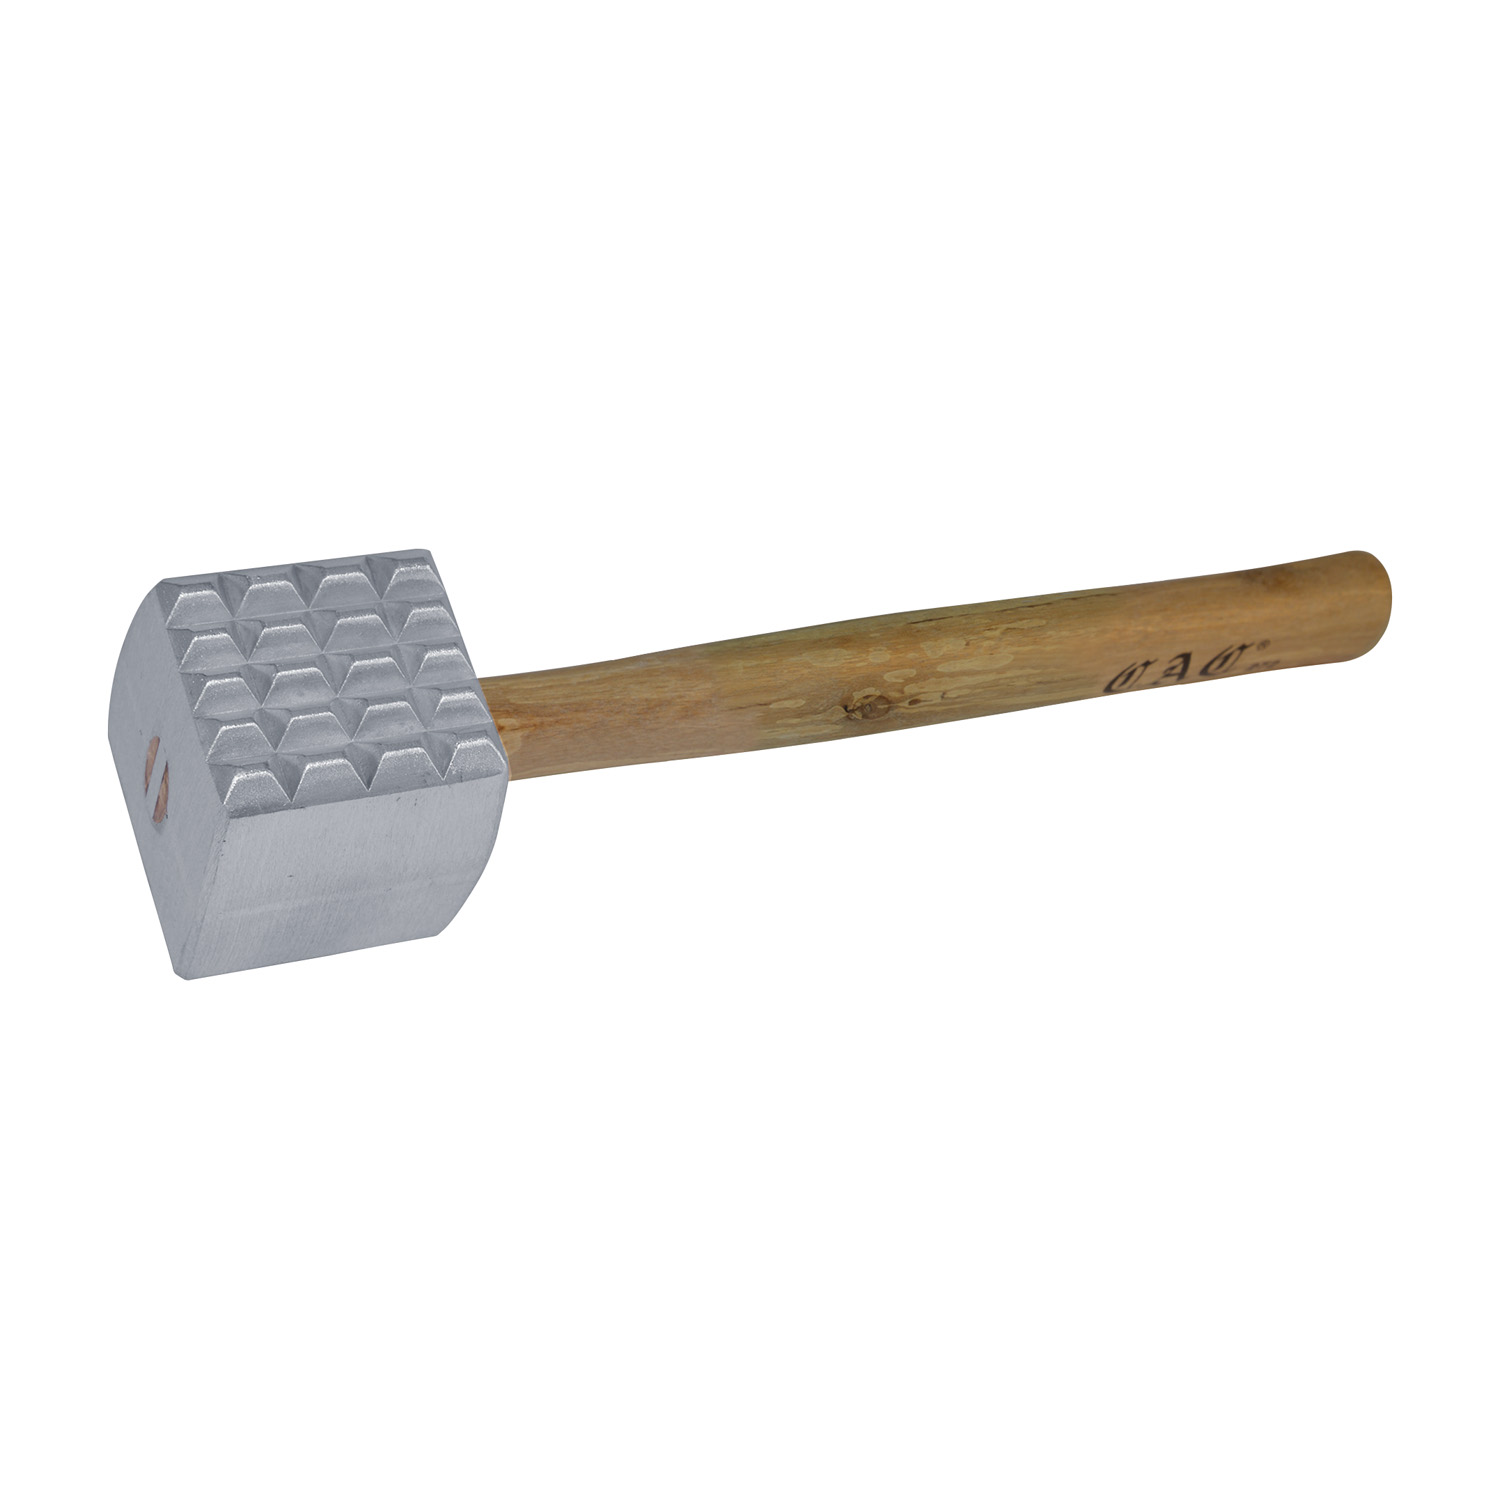 CAC China ALMT-2 Aluminum Meat Tenderizer with Wood Handle, 12-3/4"L